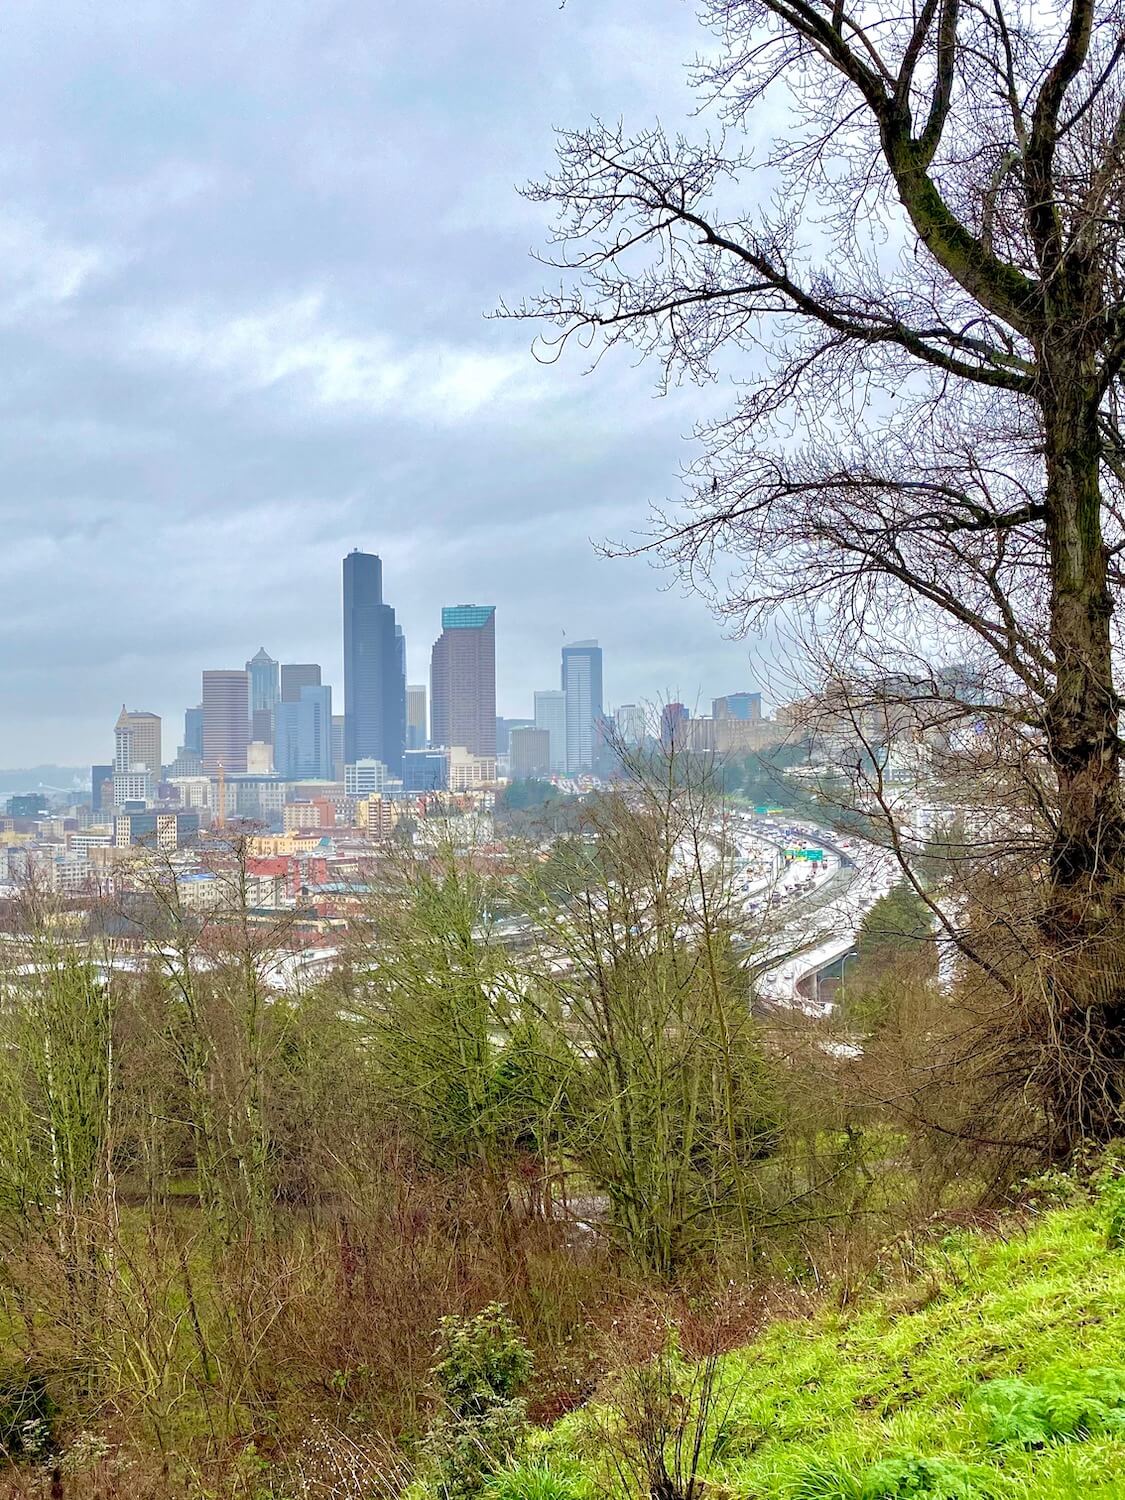 The skyline of Seattle from a park above Interstate 5.  This is the beginning of the drive between Seattle and Portland and the green grass can be seen in front of a winter scene of brush and trees that frame in the gray skies and rising buildings downtown as the freeway whizzes by below. 